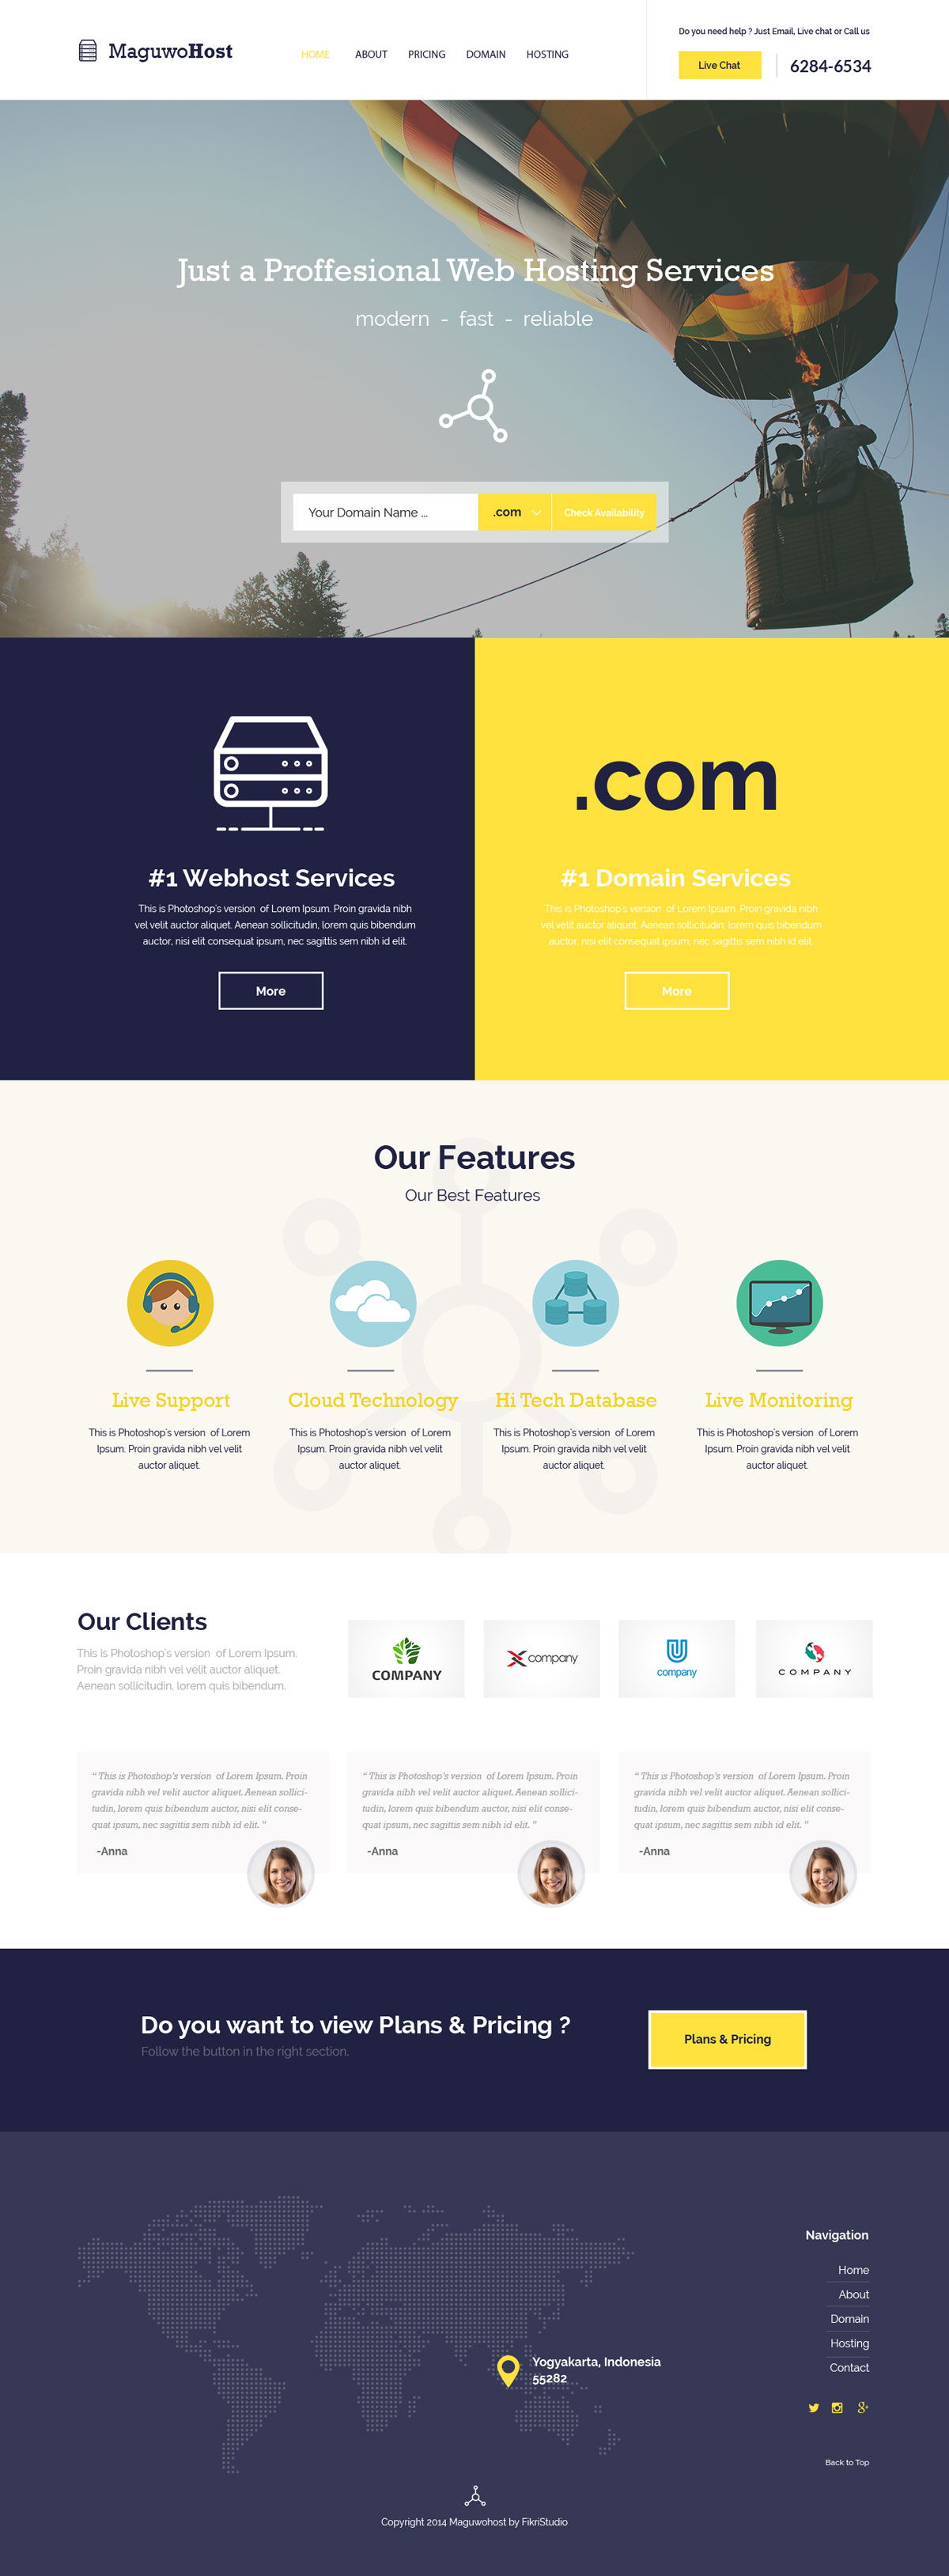 Maguwohost - FREE Hosting Template